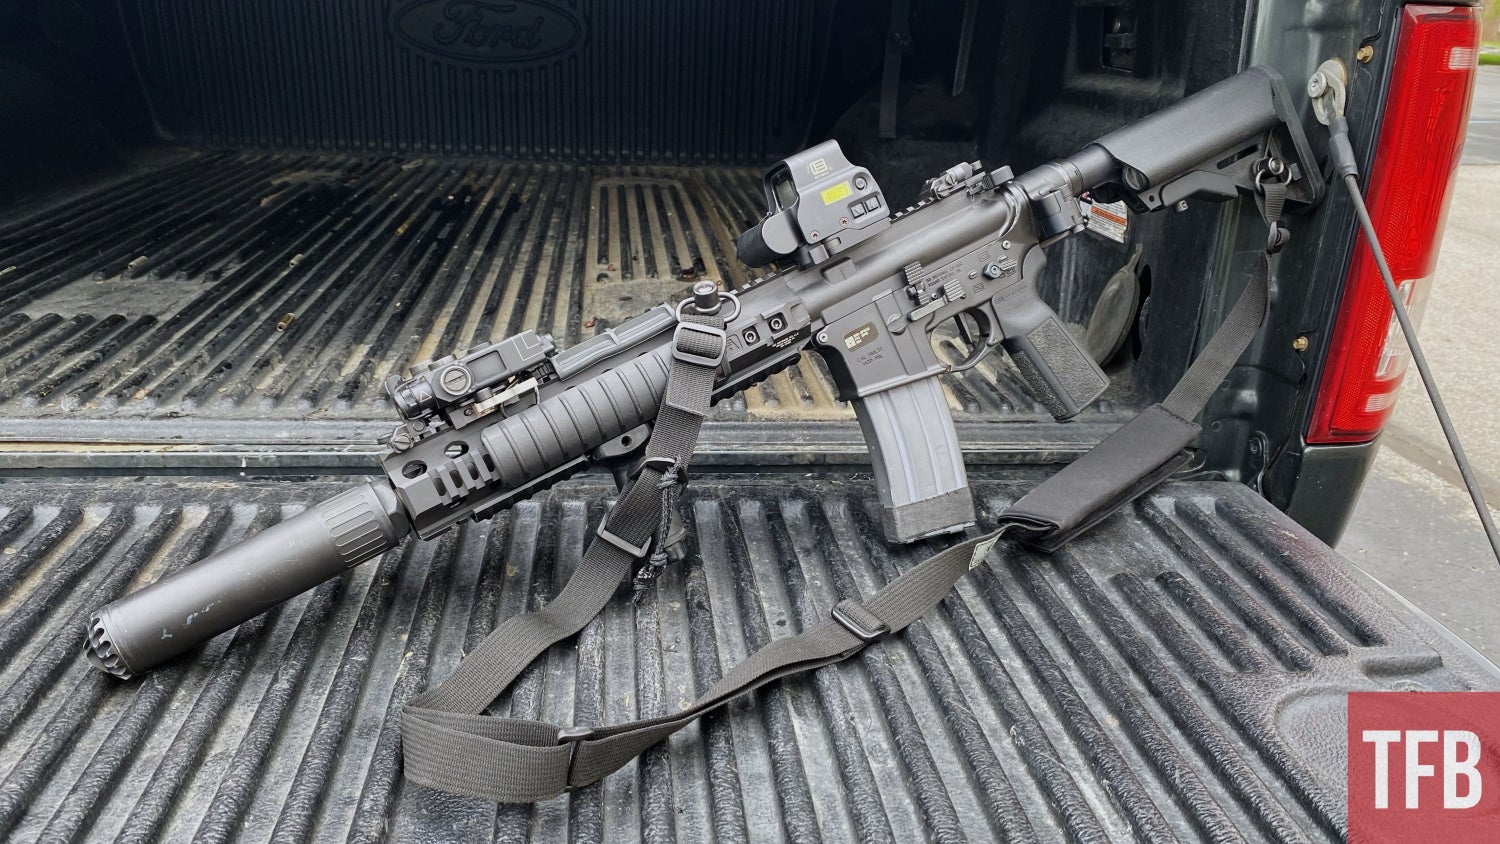 SBRs vs Bullpup Rifles - What's Best For You?